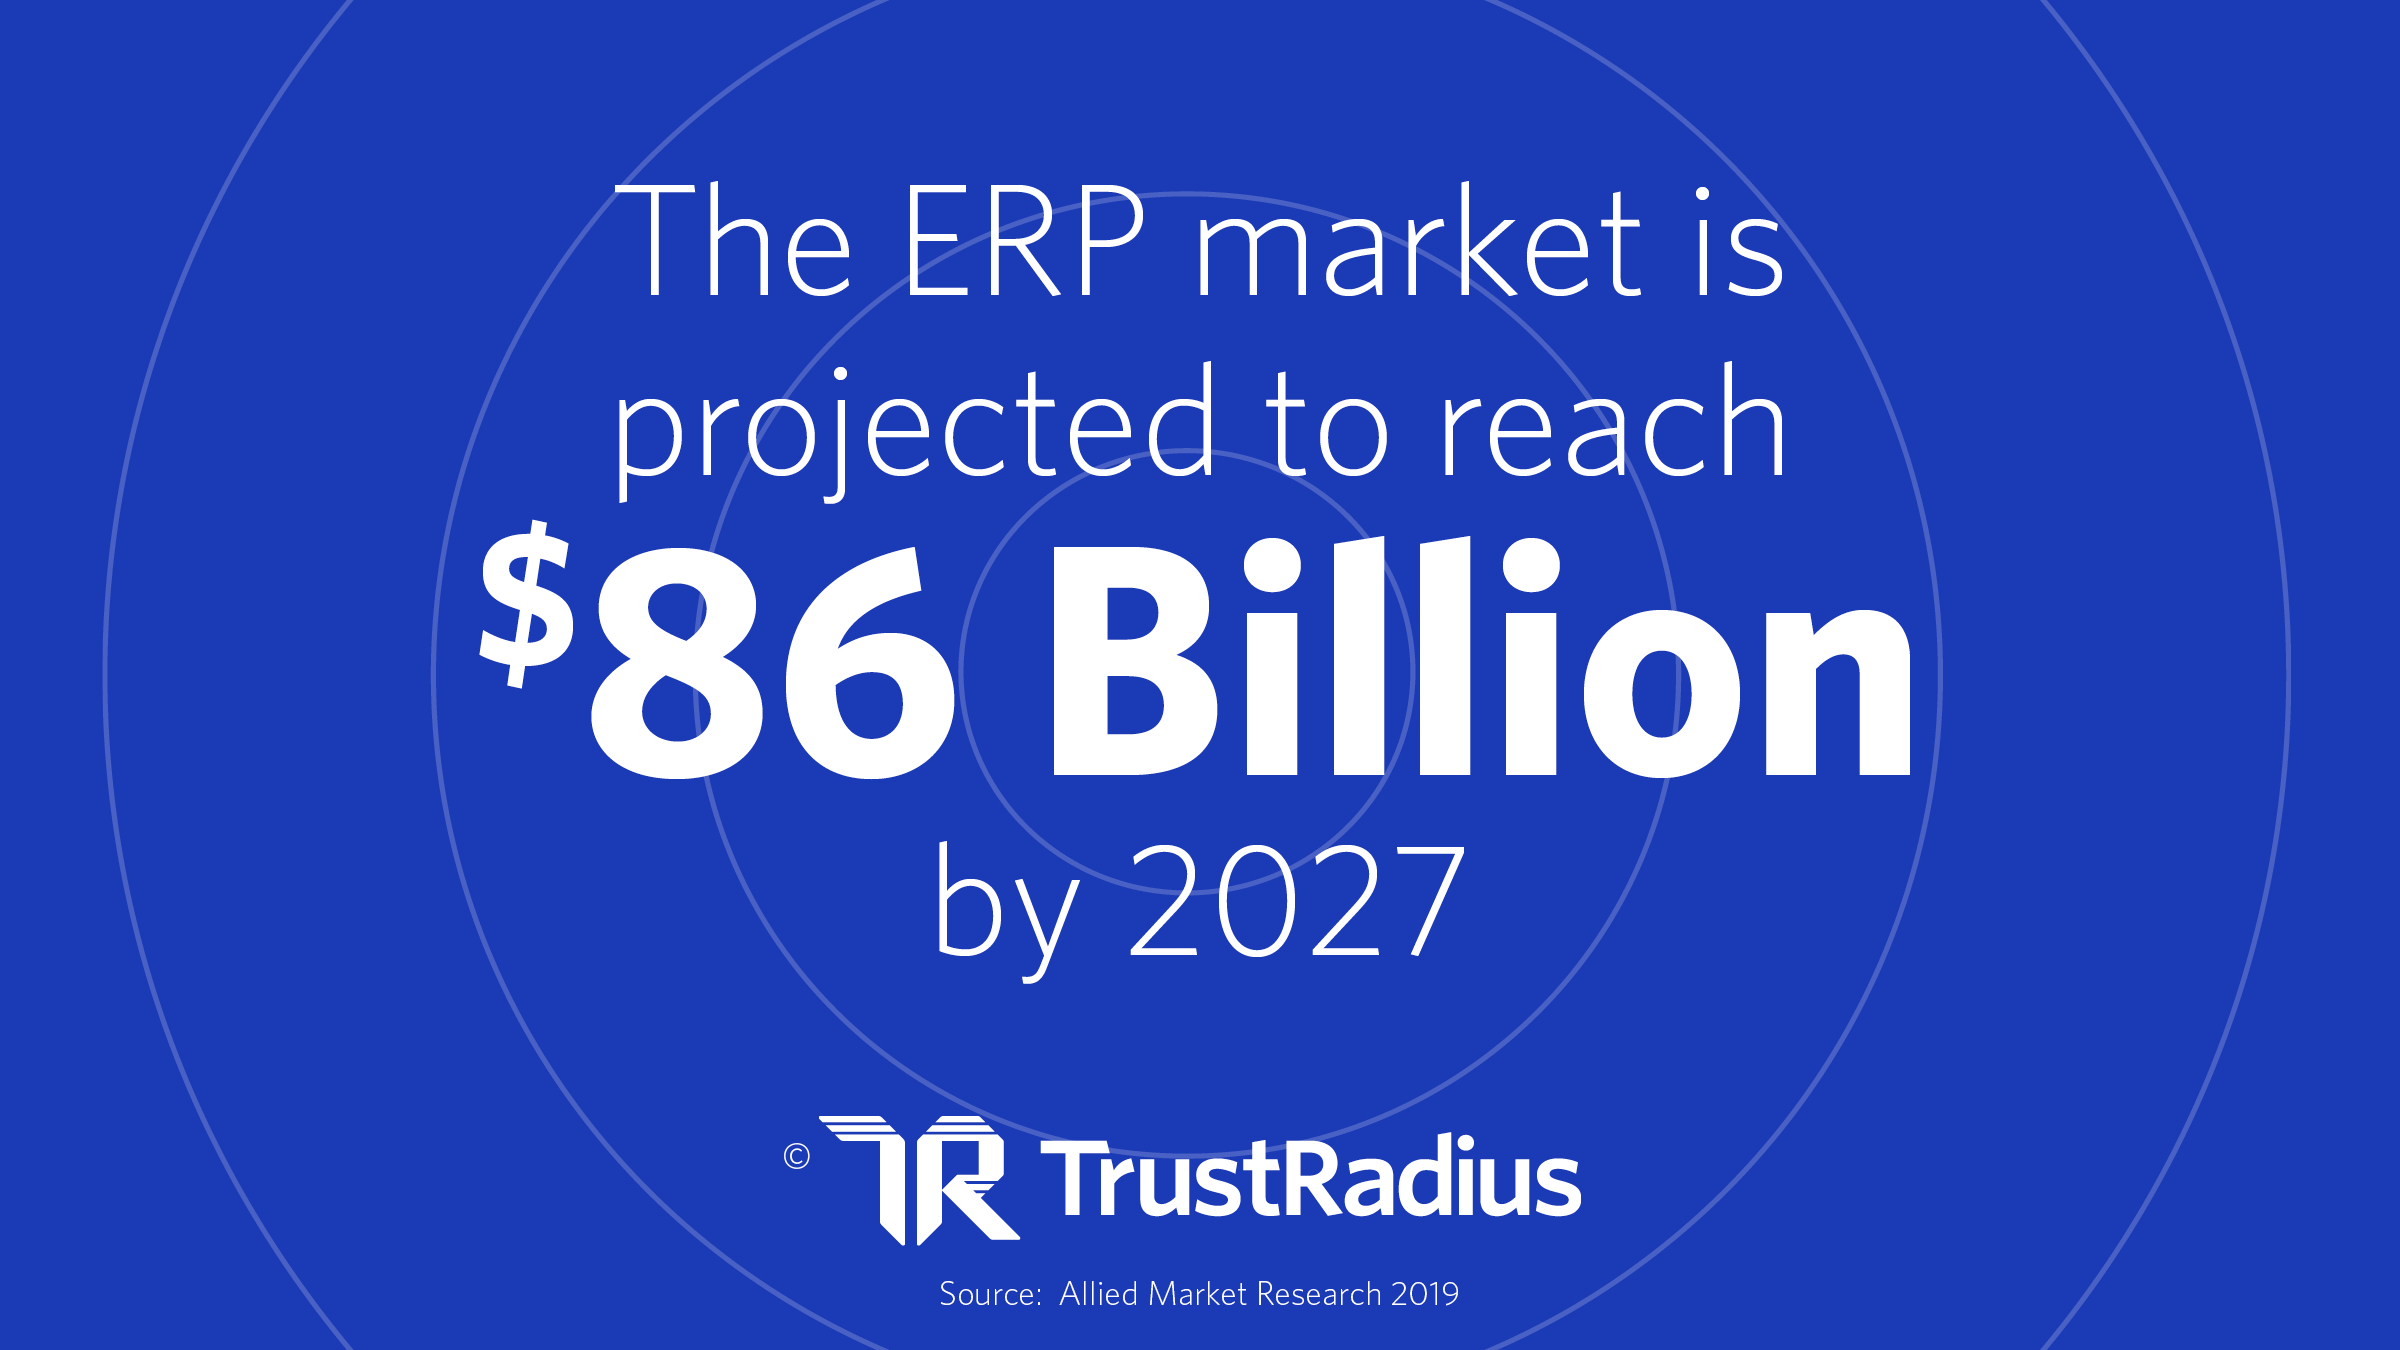 The Gobal ERP market is projected to reach 86 billion dollars by 2027